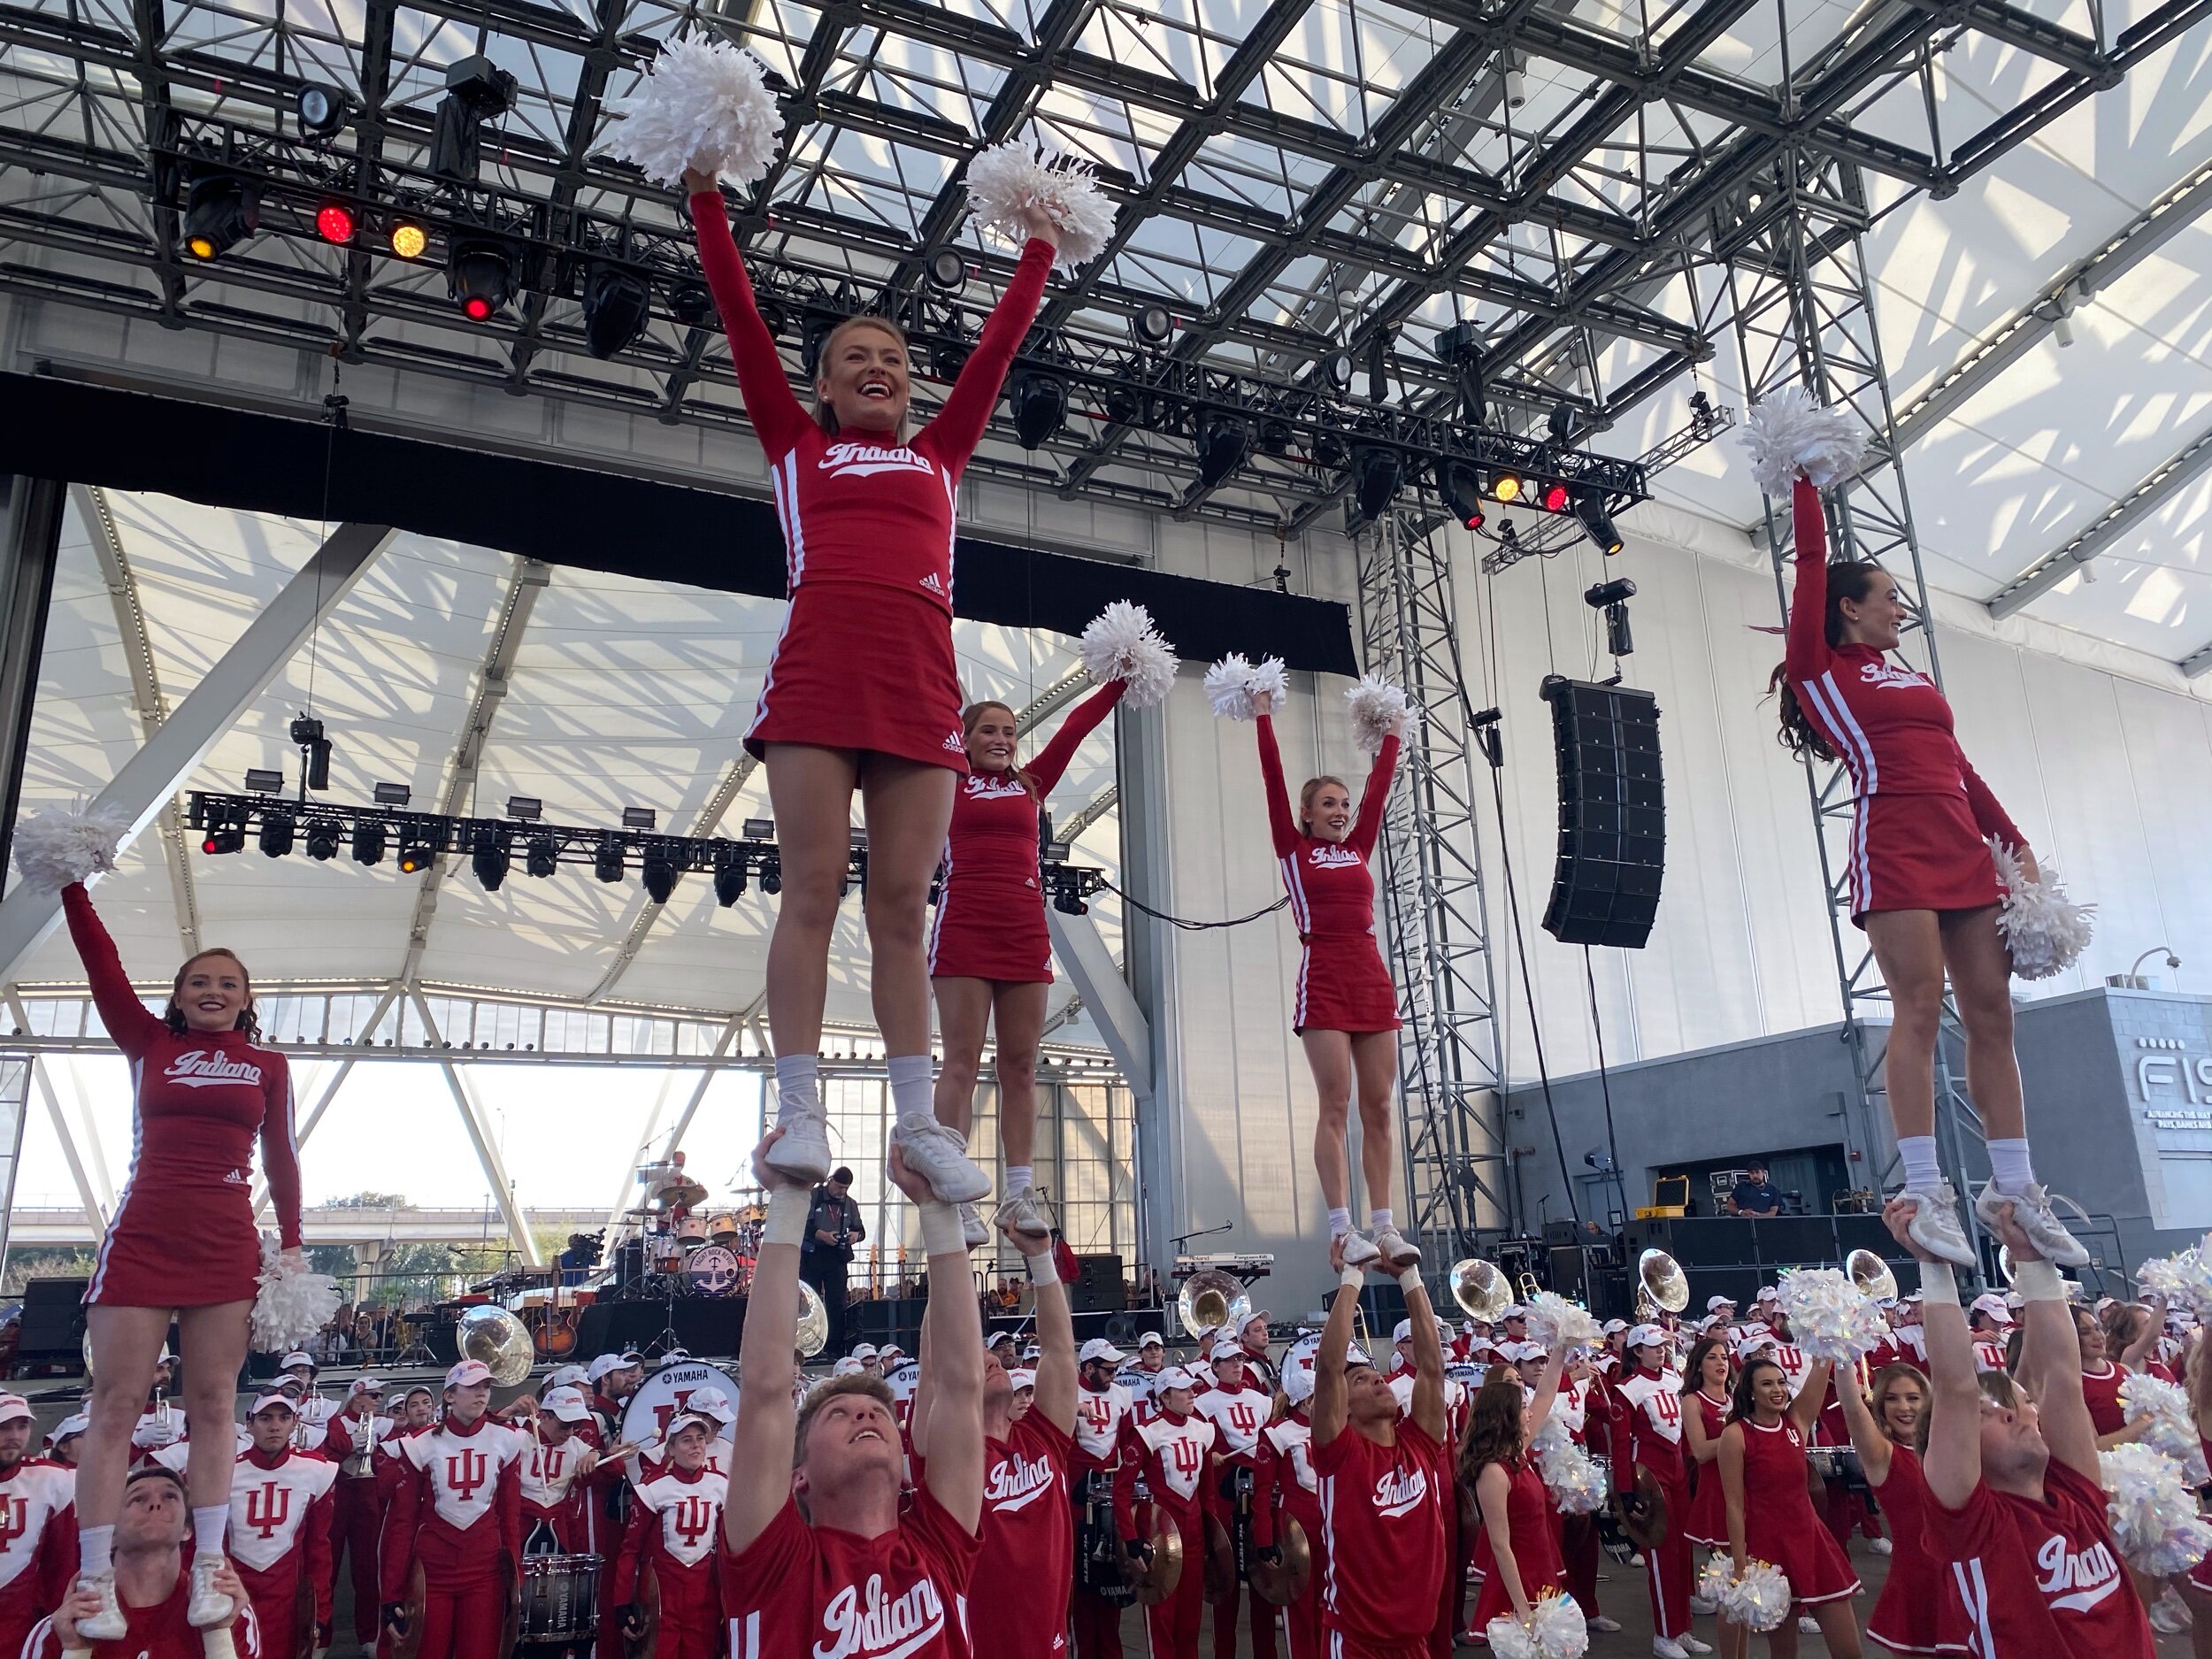  Indiana Cheerleading squad, the Marching Hundred, and Redsteppers at the pep rally on TaxSlayer Gator Bowl Gameday 